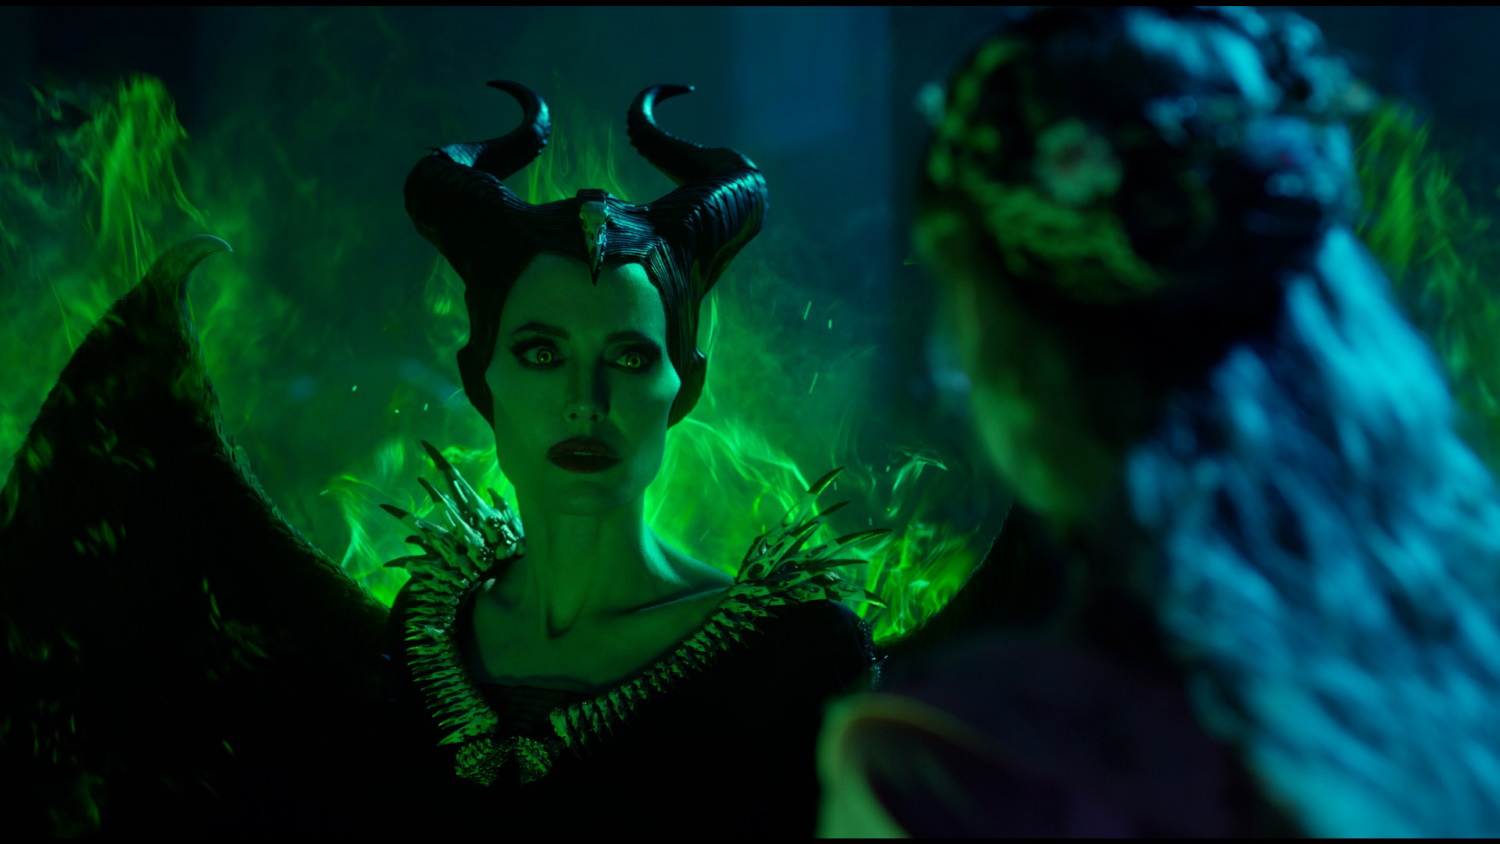 Maleficent: Mistress of Evil Movie Review